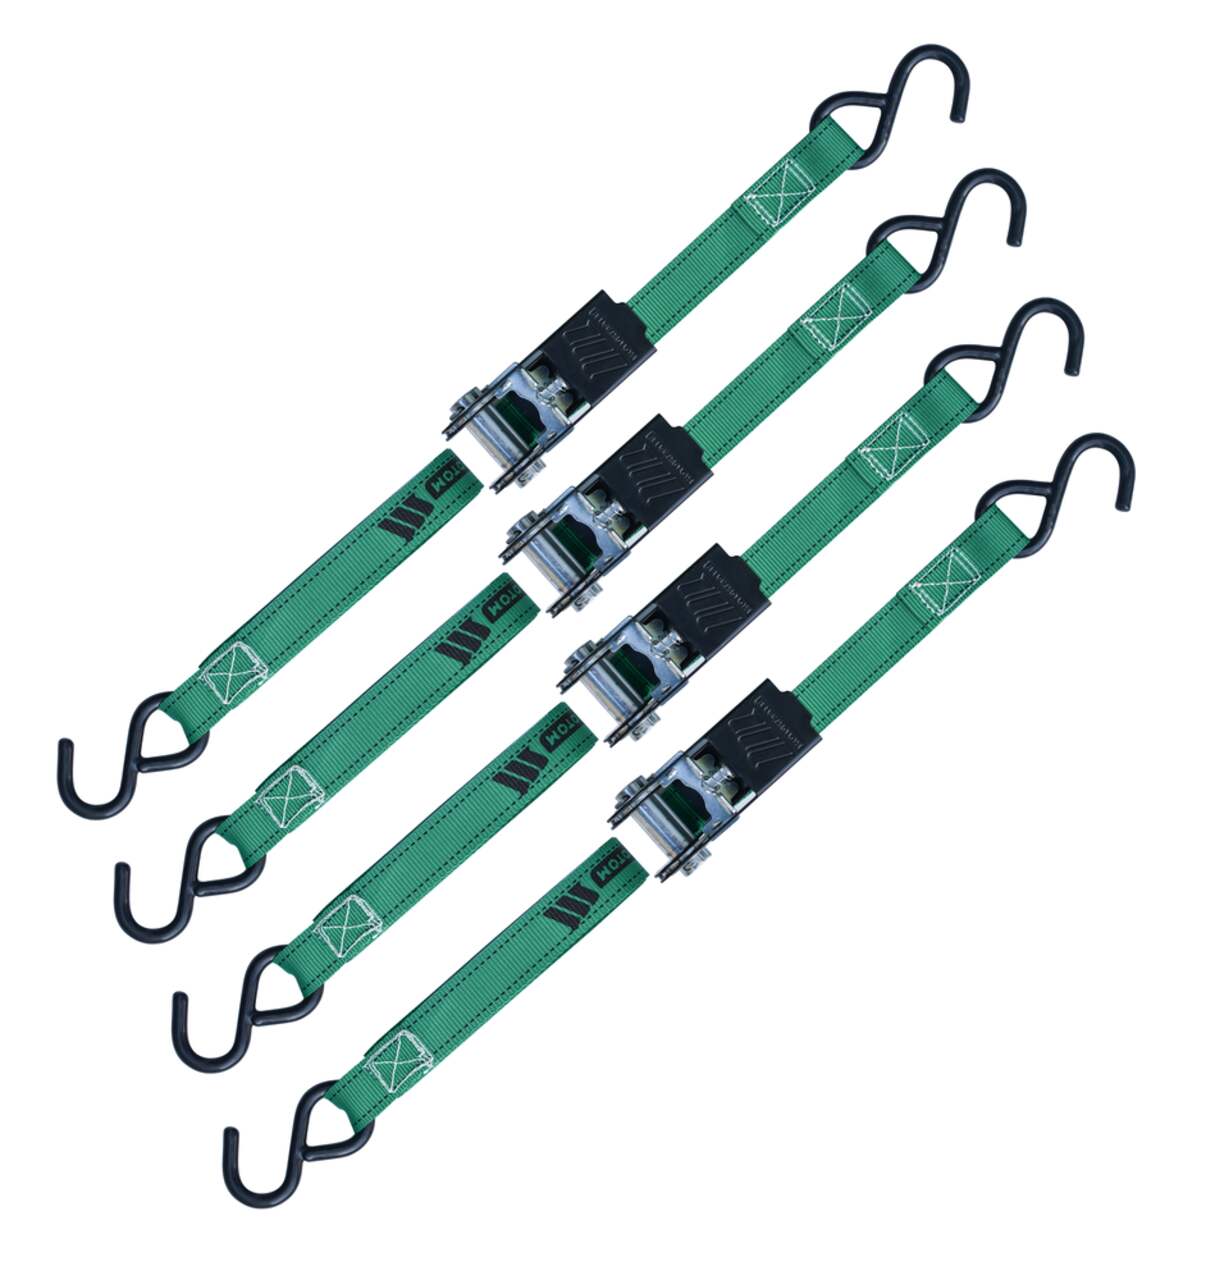 https://media-www.canadiantire.ca/product/automotive/automotive-outdoor-adventure/tarps-cords/0402614/10ft-900lb-non-padded-ratchet-tie-downs-4pk-8afd86eb-a9d8-4ce4-b9d0-9a524ff547c2.png?imdensity=1&imwidth=640&impolicy=mZoom